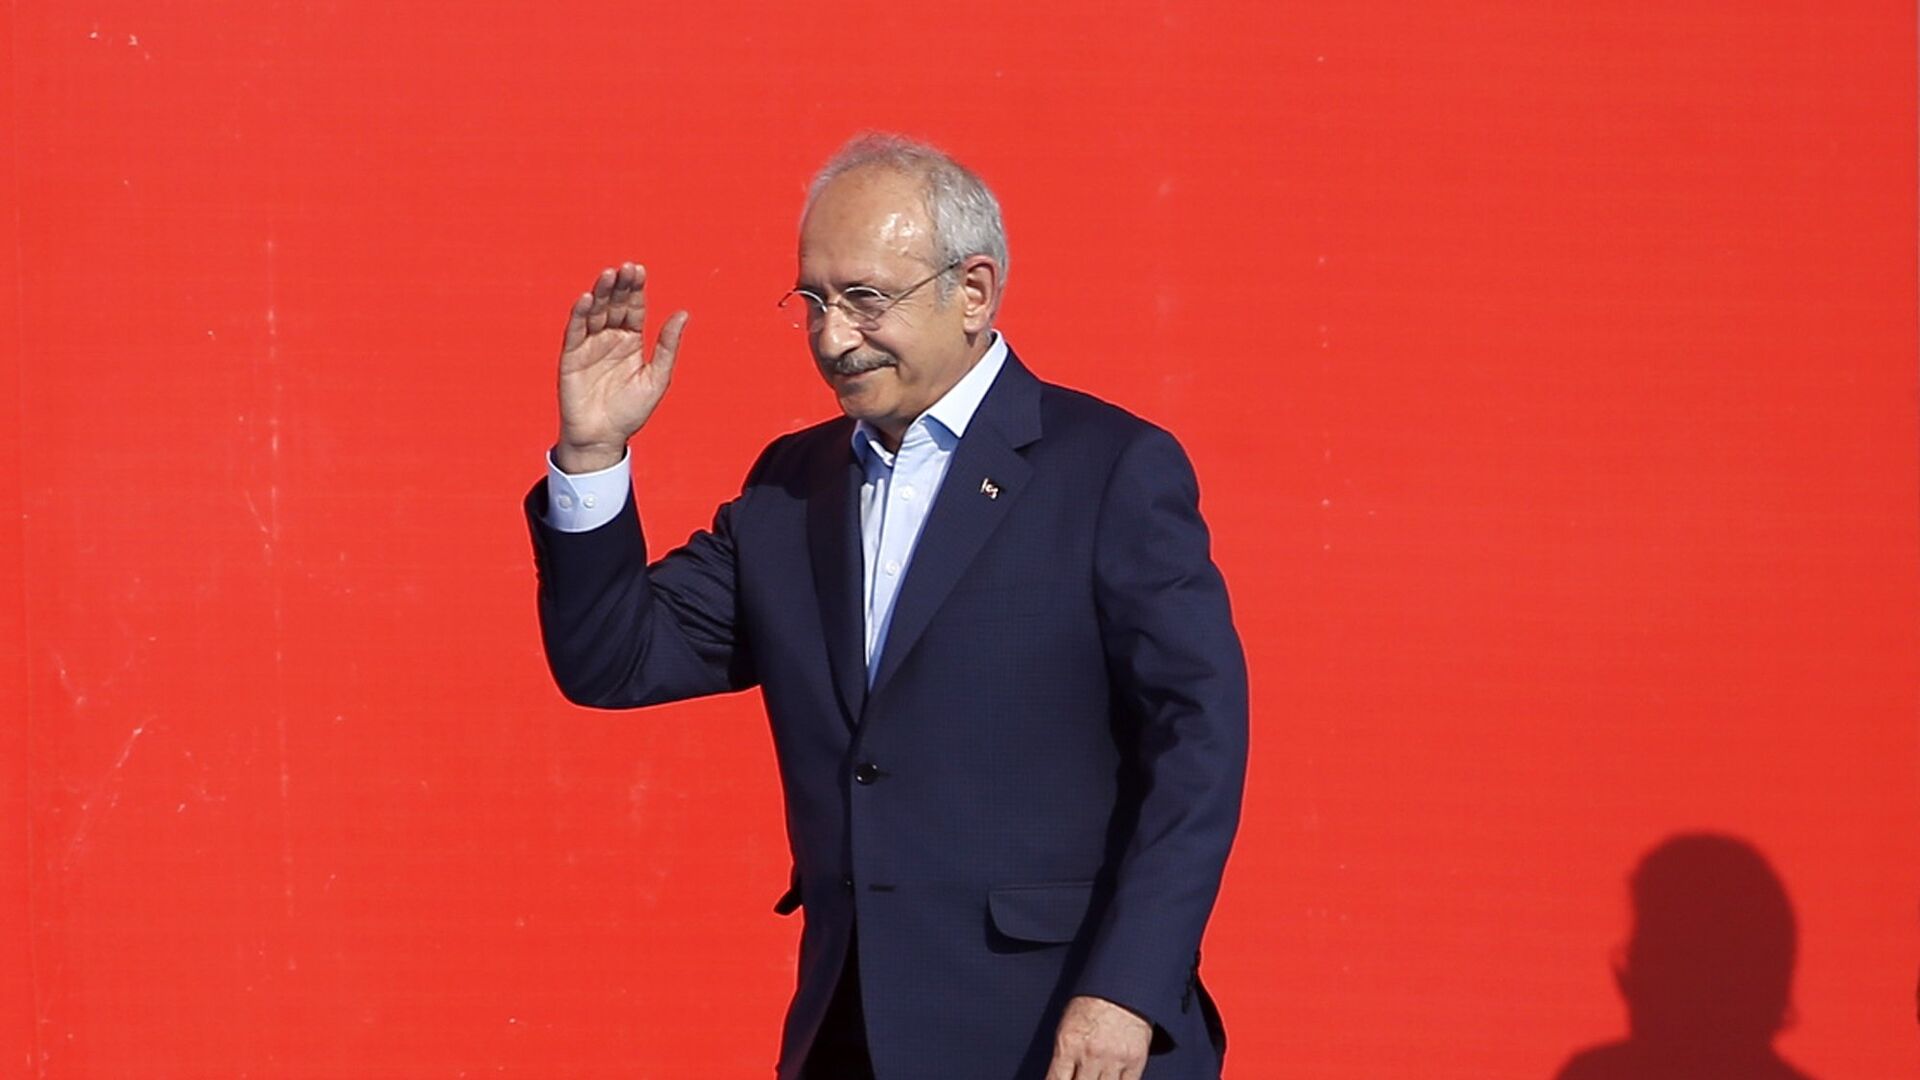 The opposition in Turkey announced the name of a single candidate in the 14 May elections.